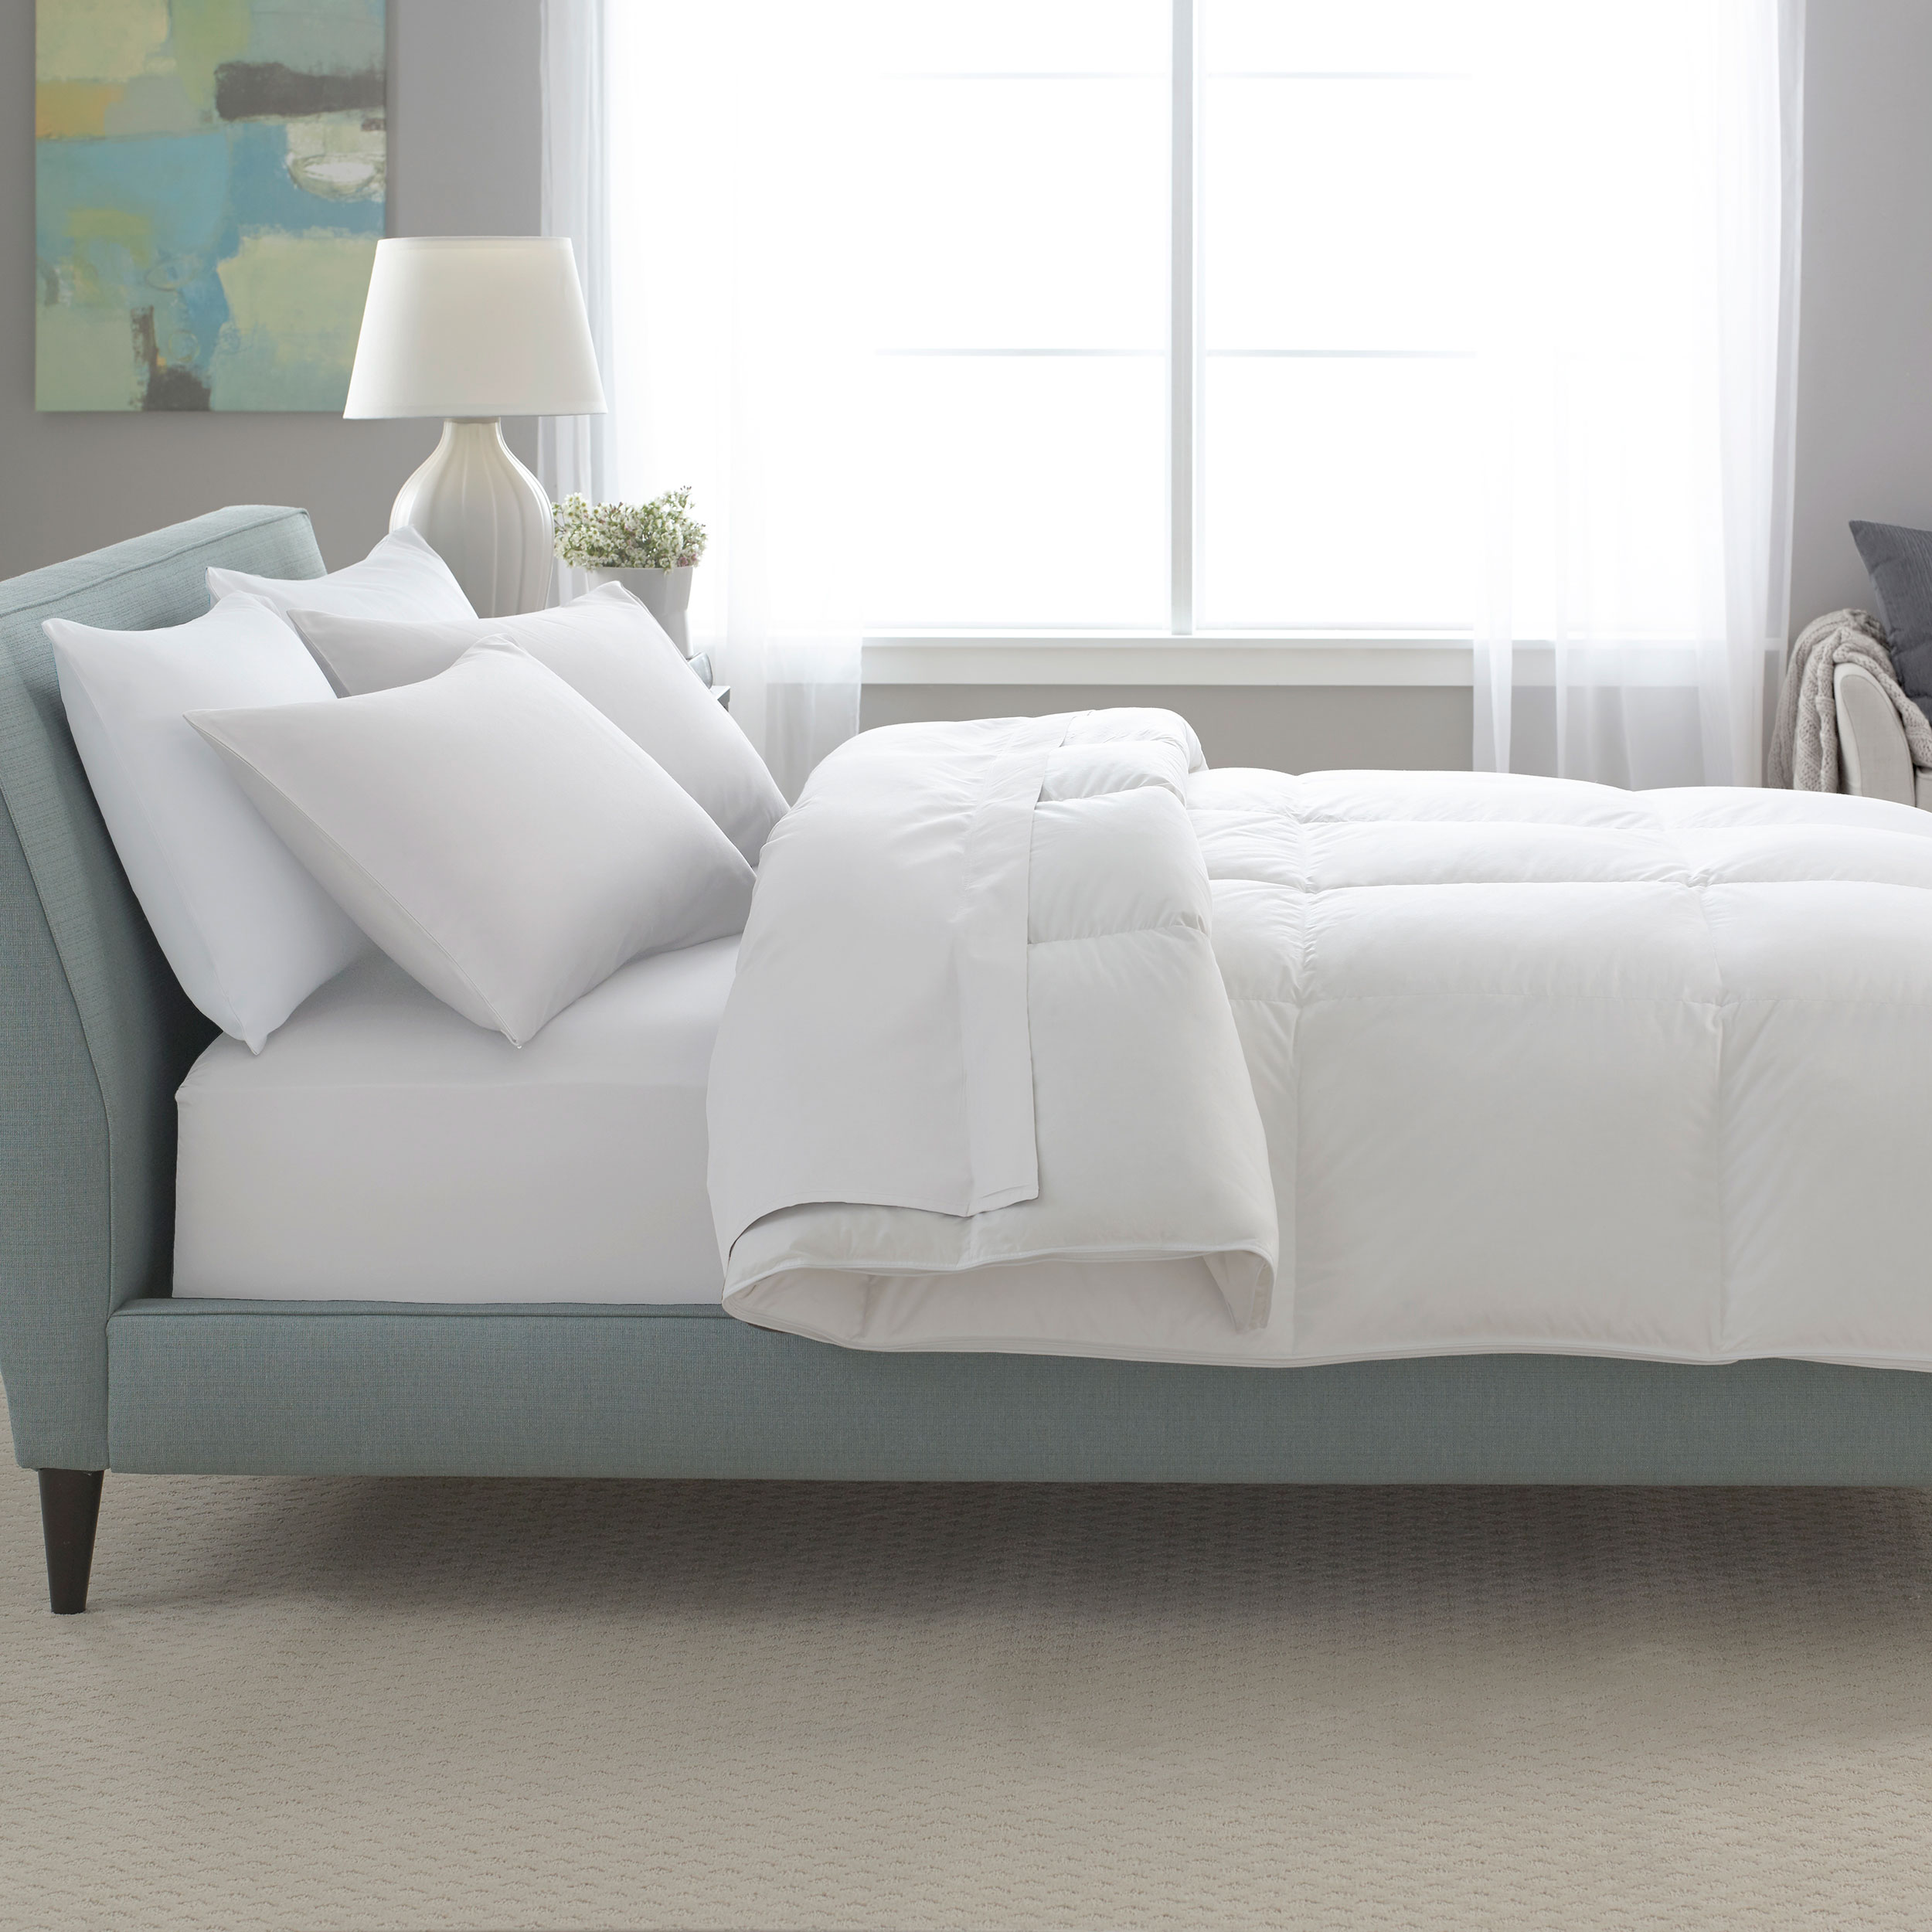 Image of Restful Nights 300 Thread Count Down Alternative Comforter Queen | Pacific Coast Feather